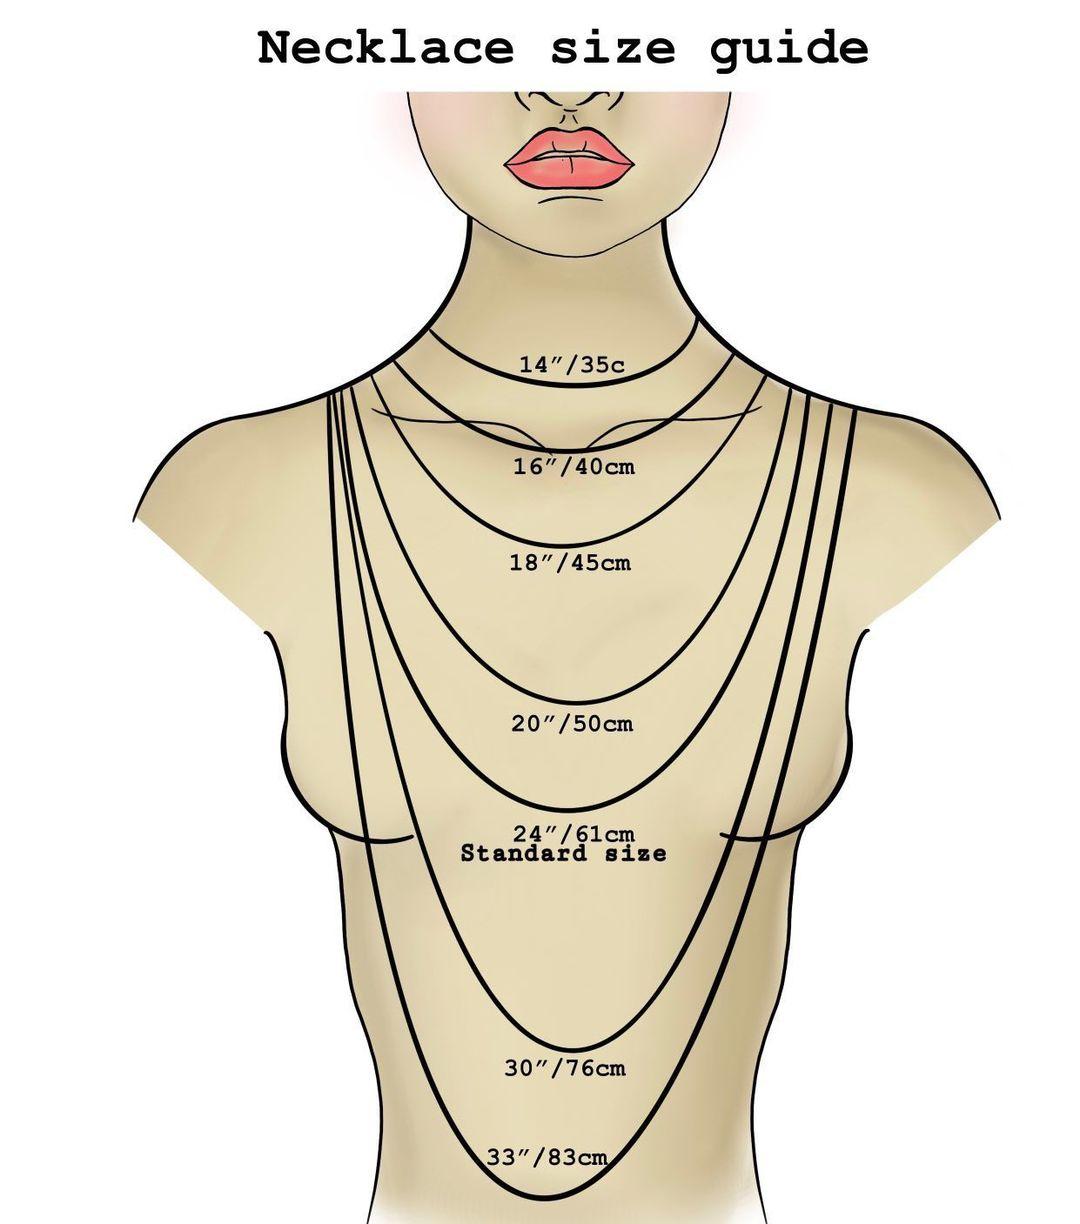 Blossy Naturals Beechwood Necklace size chart for  Breastfeeding, Teething and Fiddle Jewellery at its finest.